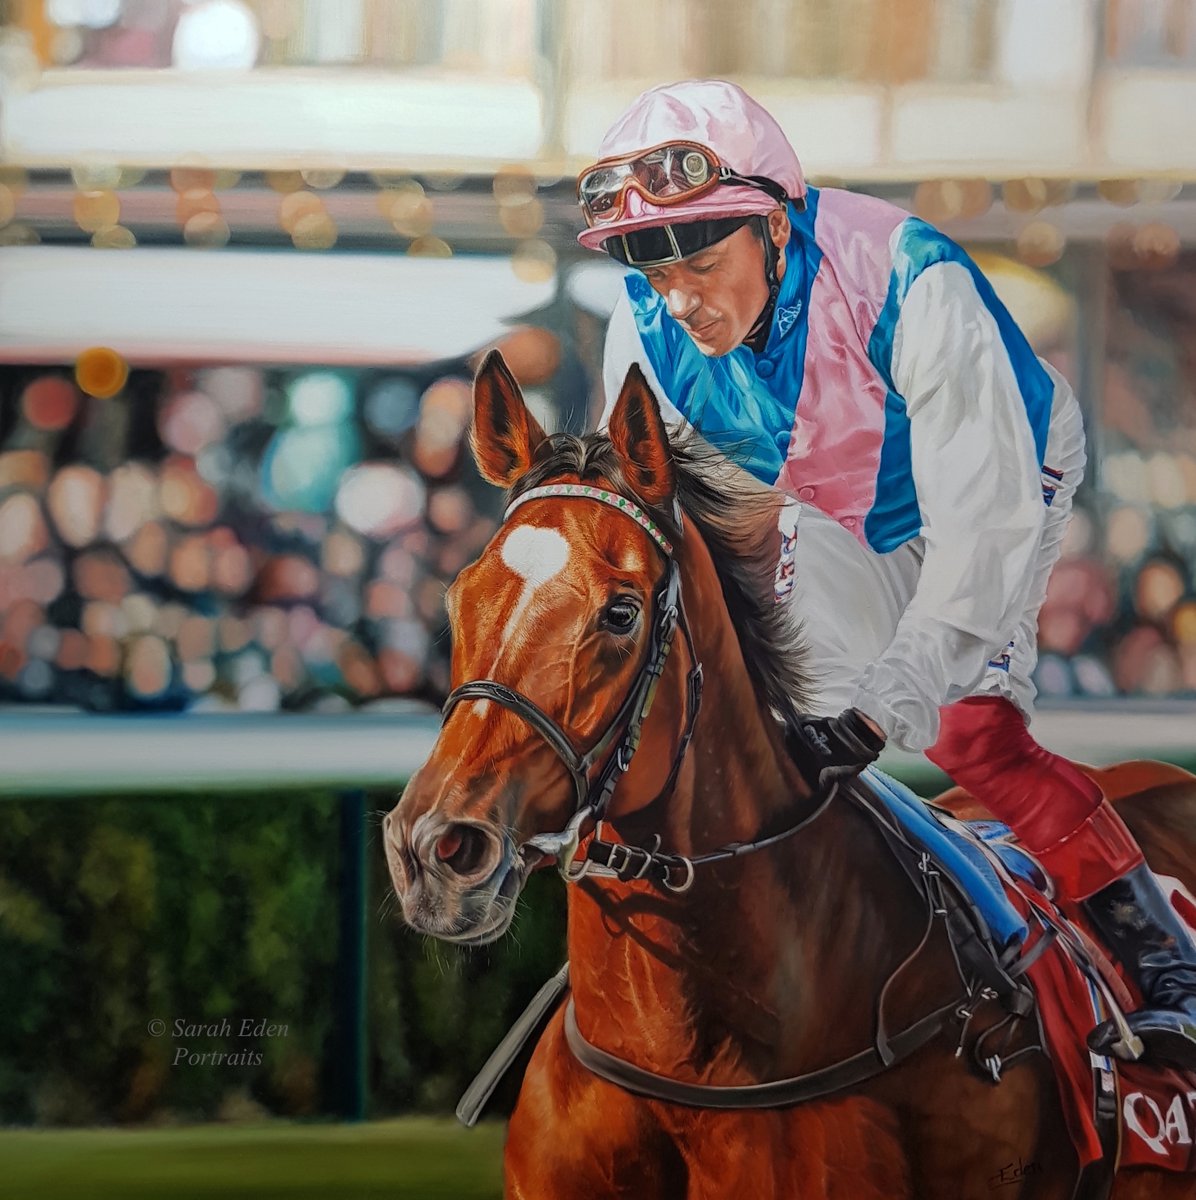 I think I may have just finished this painting of Enable being ridden by Frankie Dettori. It has been INTENSE!!!

'Enable', oil on board, 24 x 24'
Photo Reference: Steven Cargill

#horseracing #thoroughbred #enable #frankiedettori #racehorse #sportingart #racing